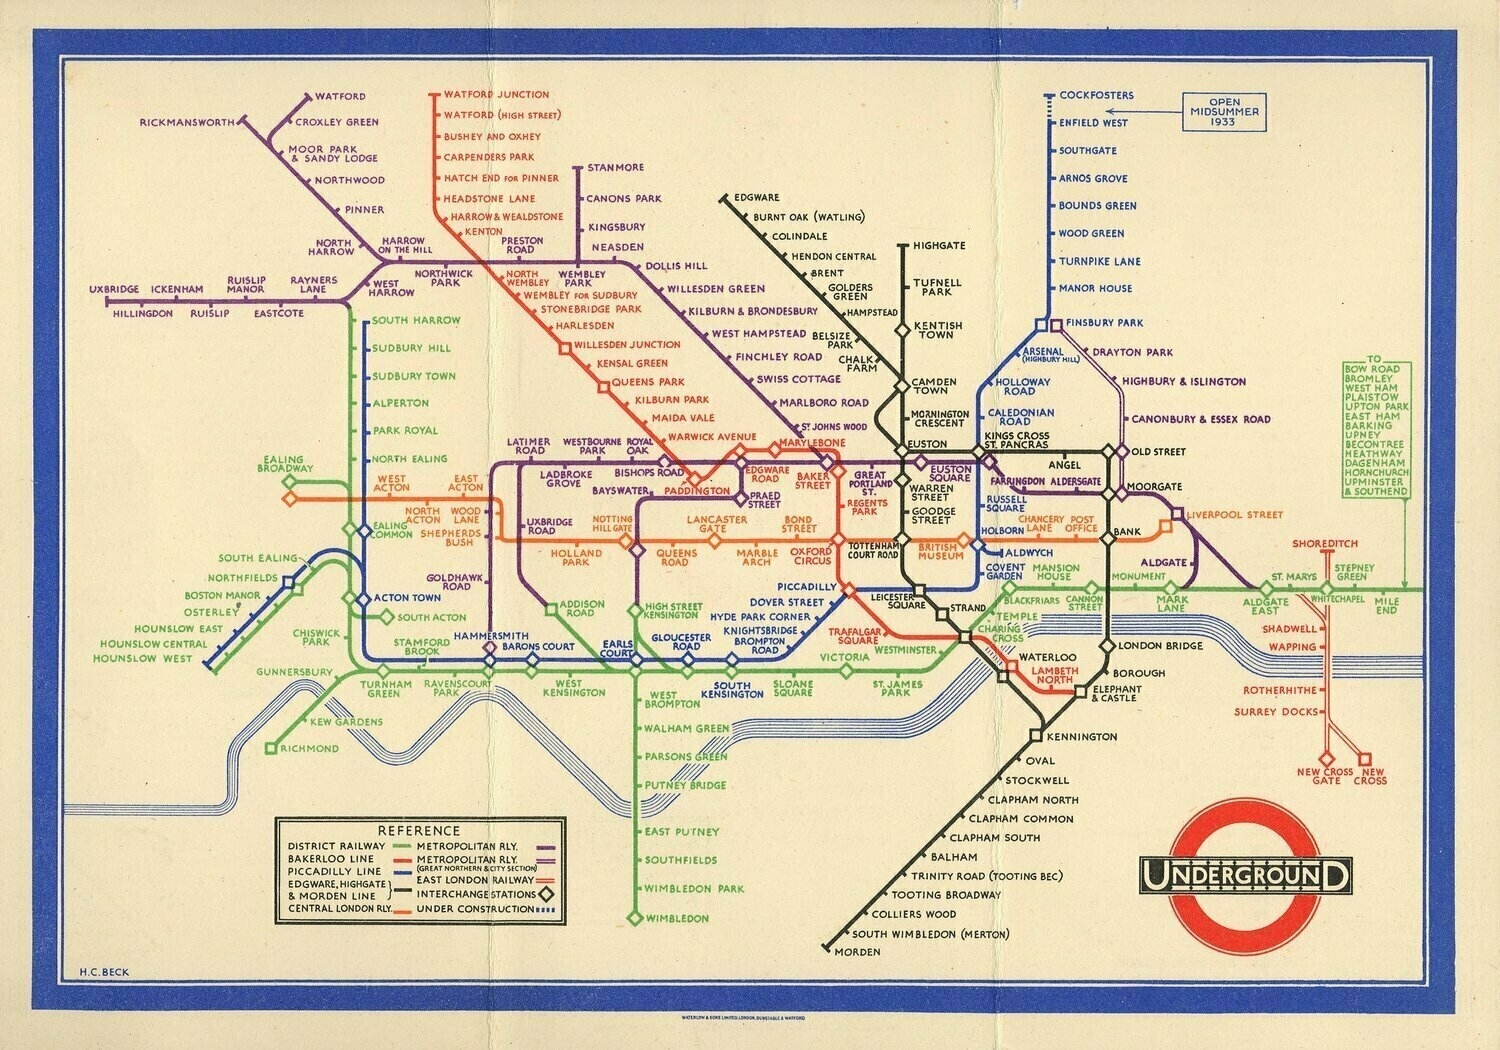 Harry Beck’s diagram of the London Underground network.